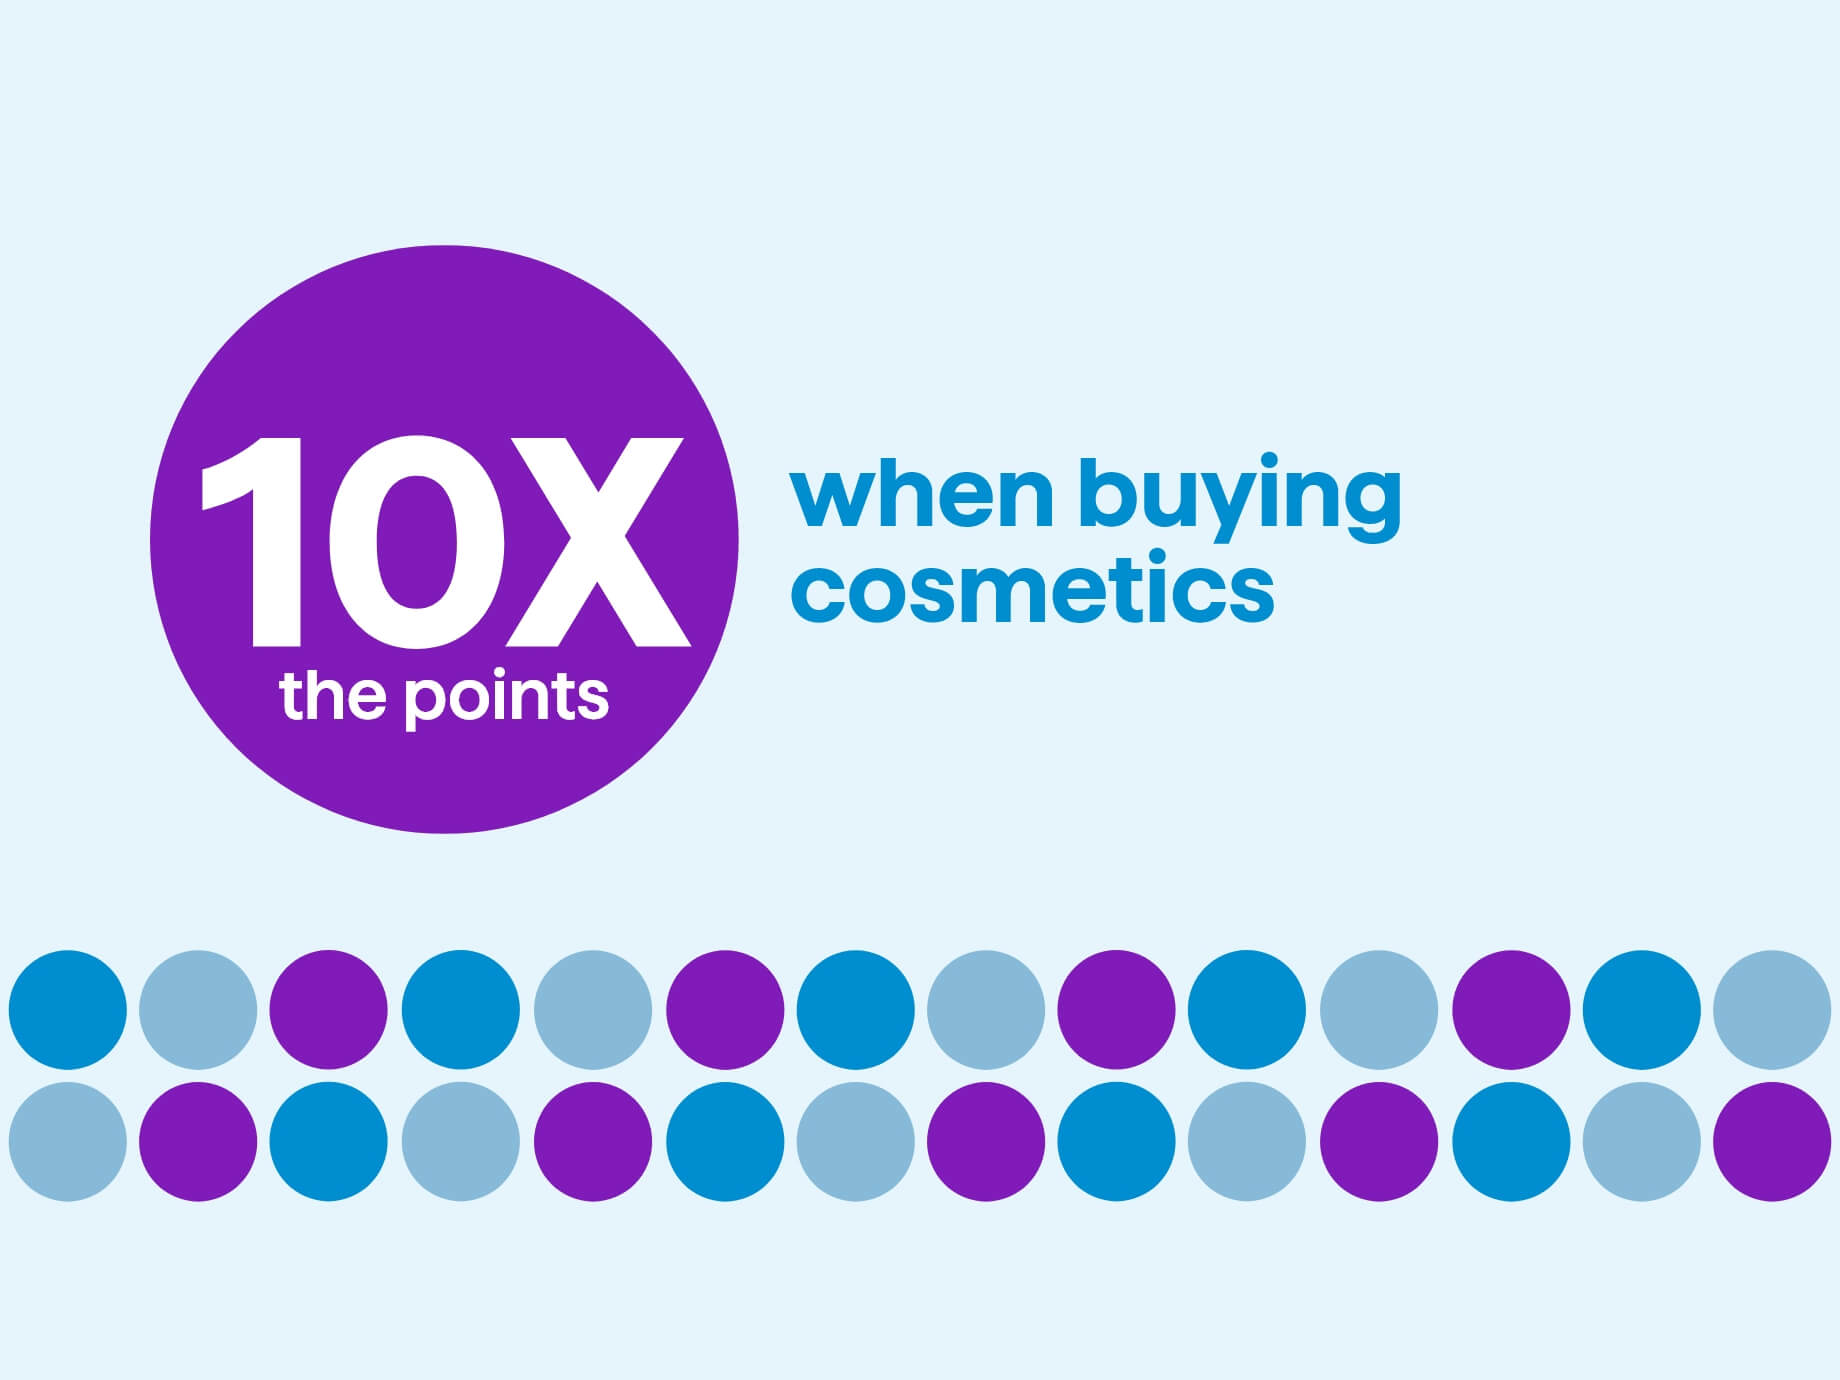 10X points when buying cosmetics